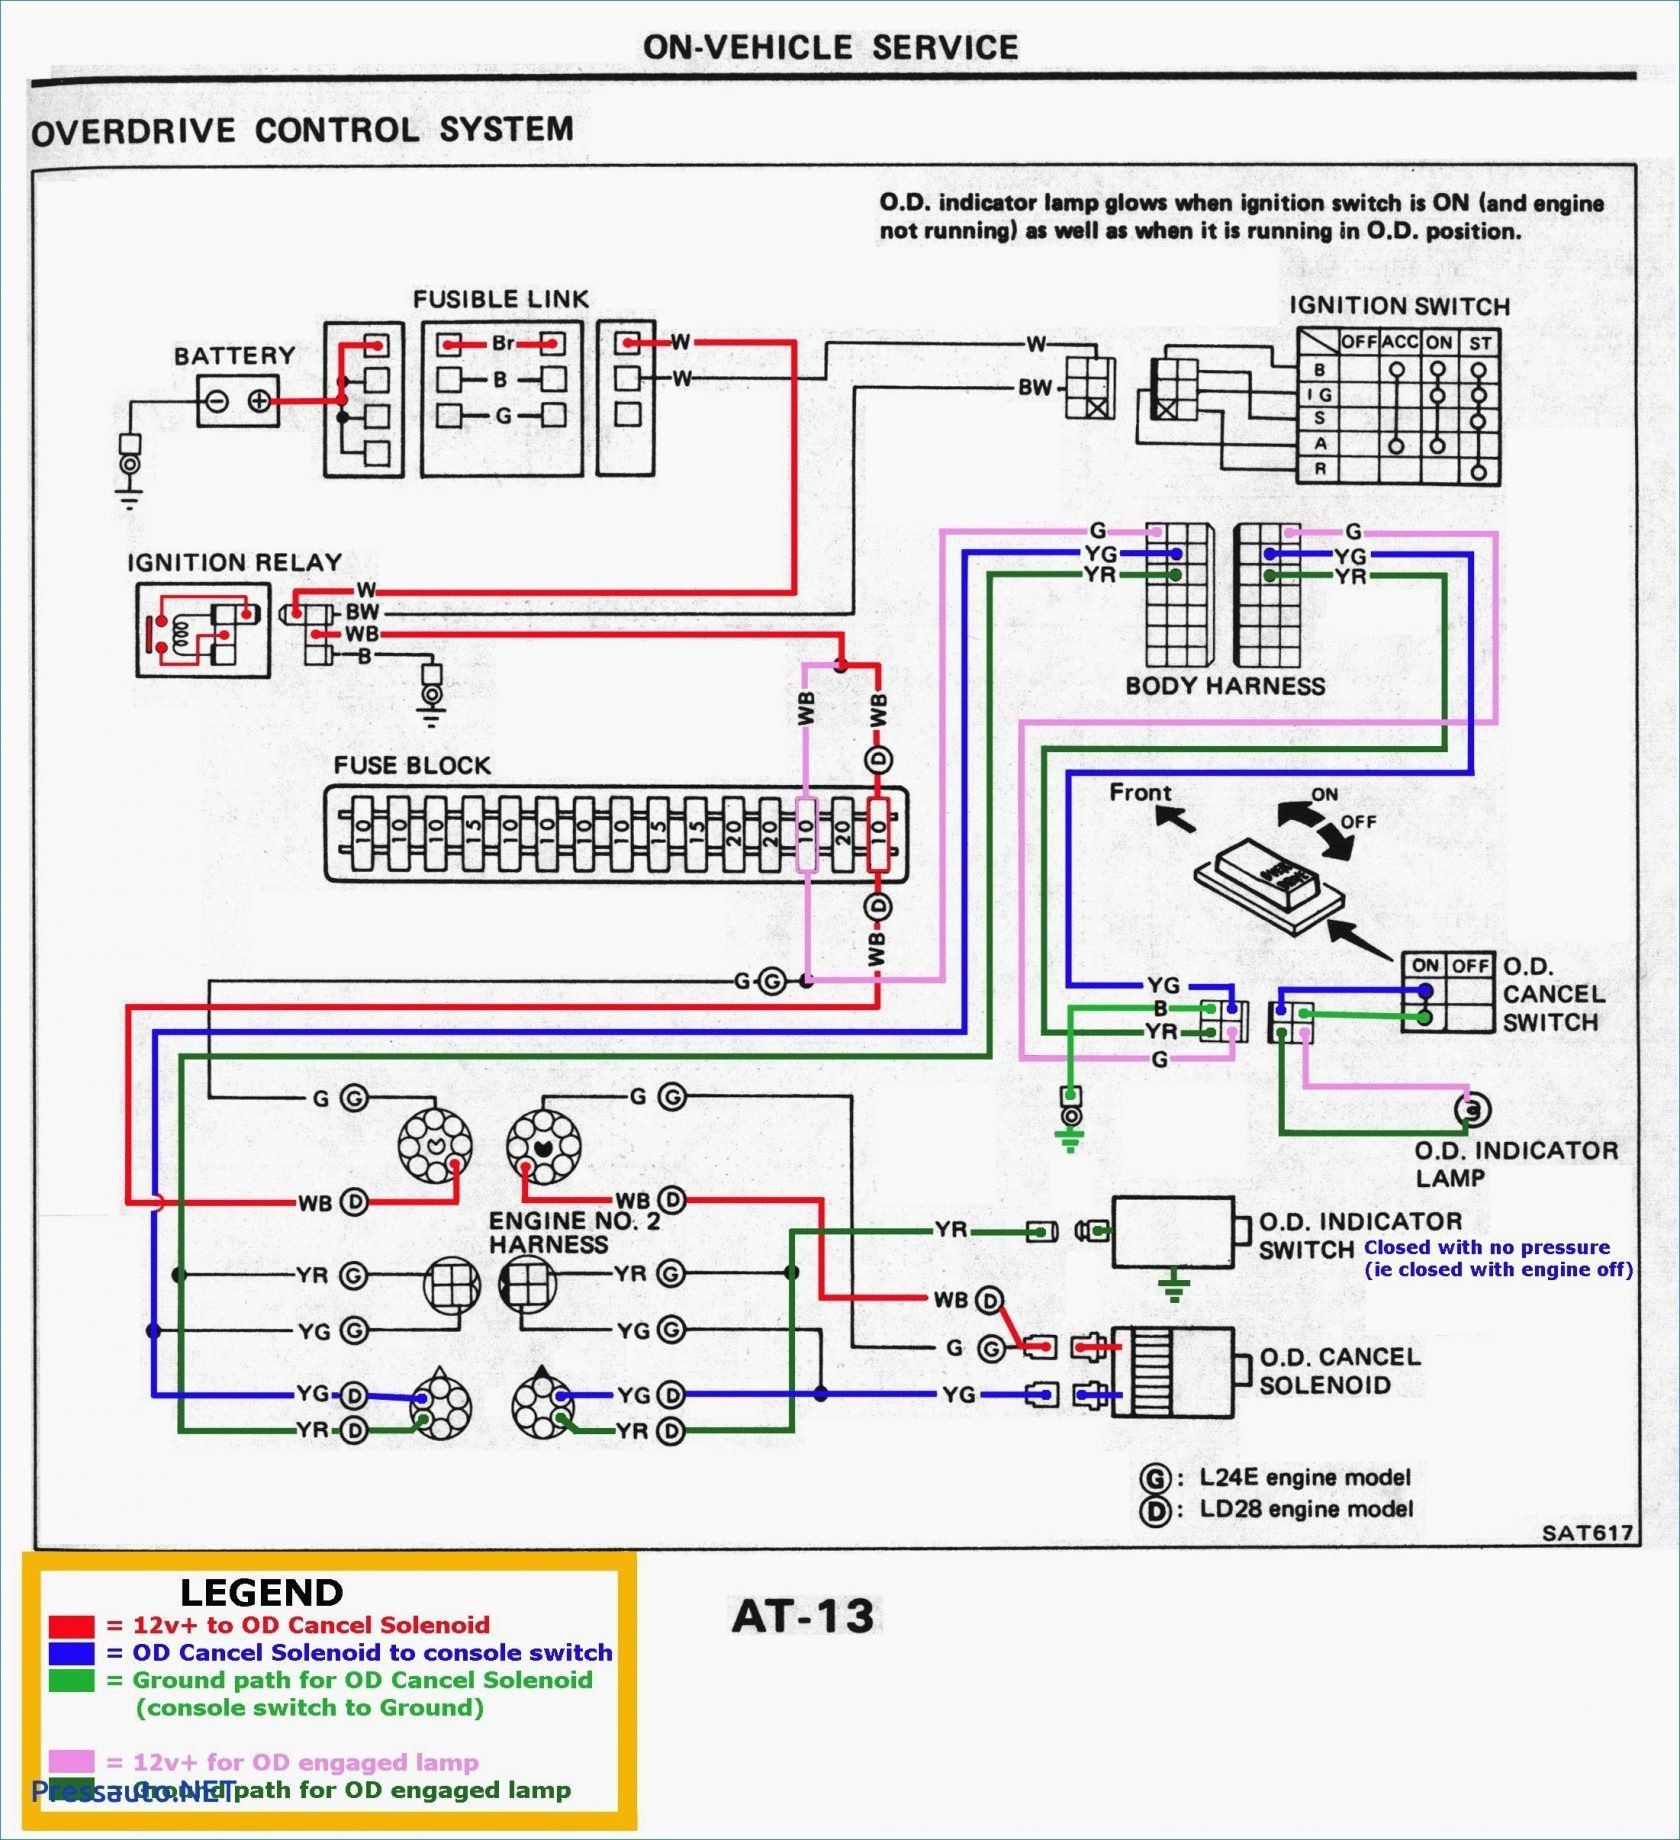 Electric Car Motor Diagram Electric Wire Diagram Wiring Diagram toolbox Of Electric Car Motor Diagram